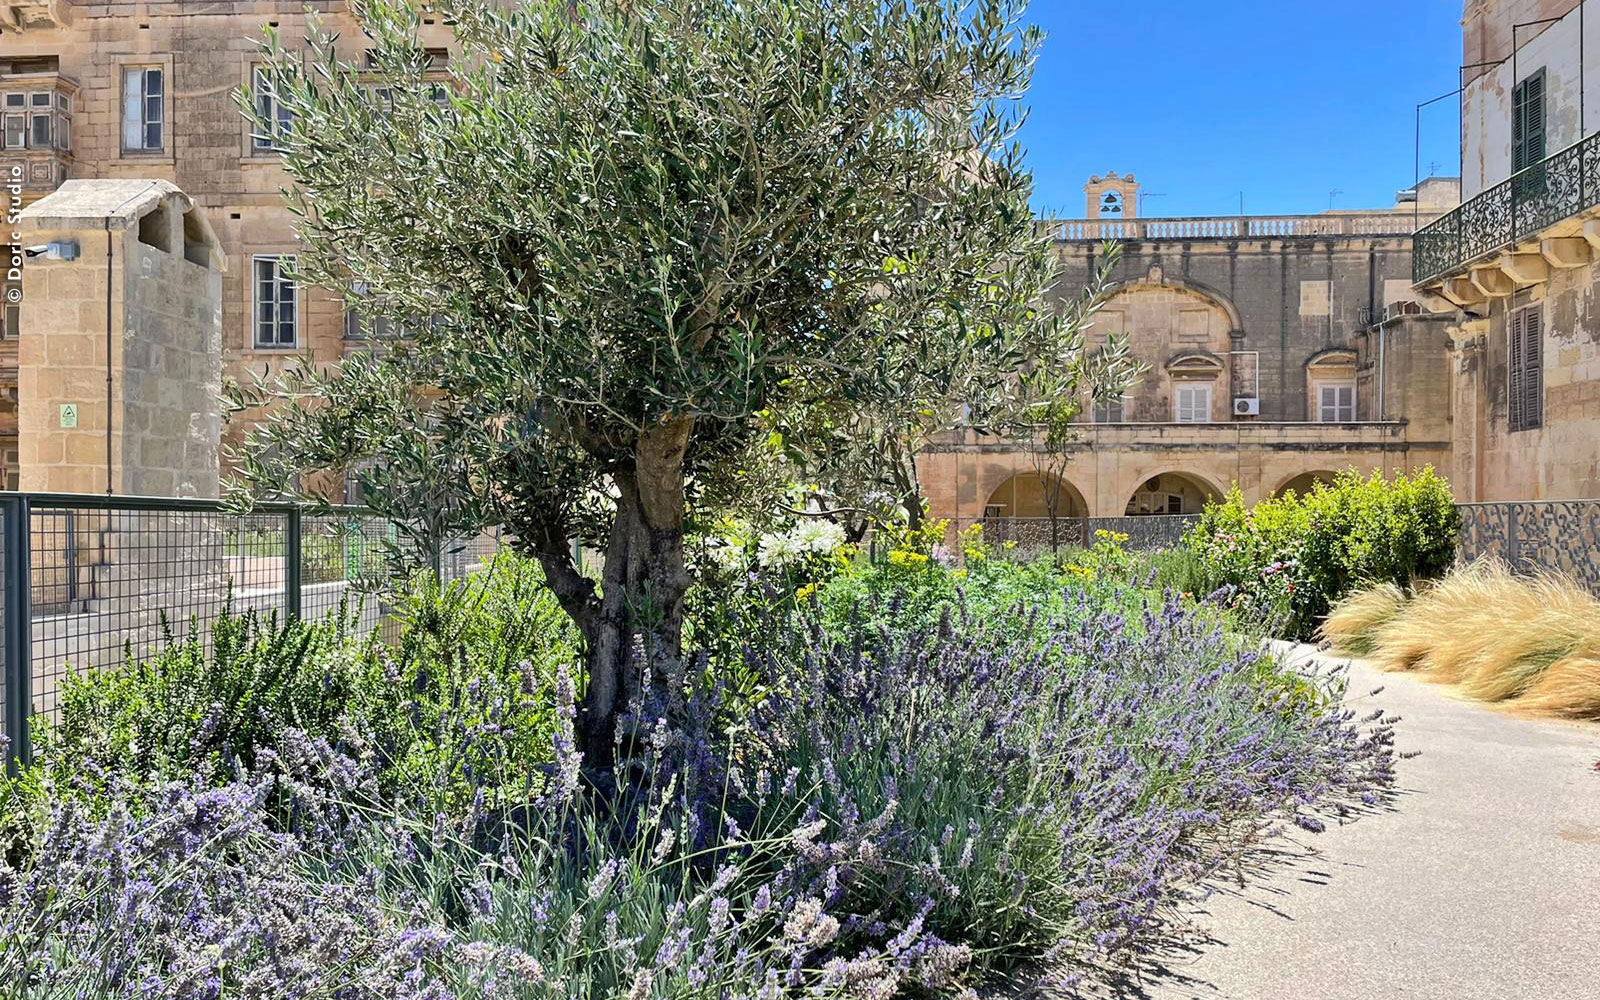 Roof garden with lavender, an olive tree, ornamental grasses and other shrubs